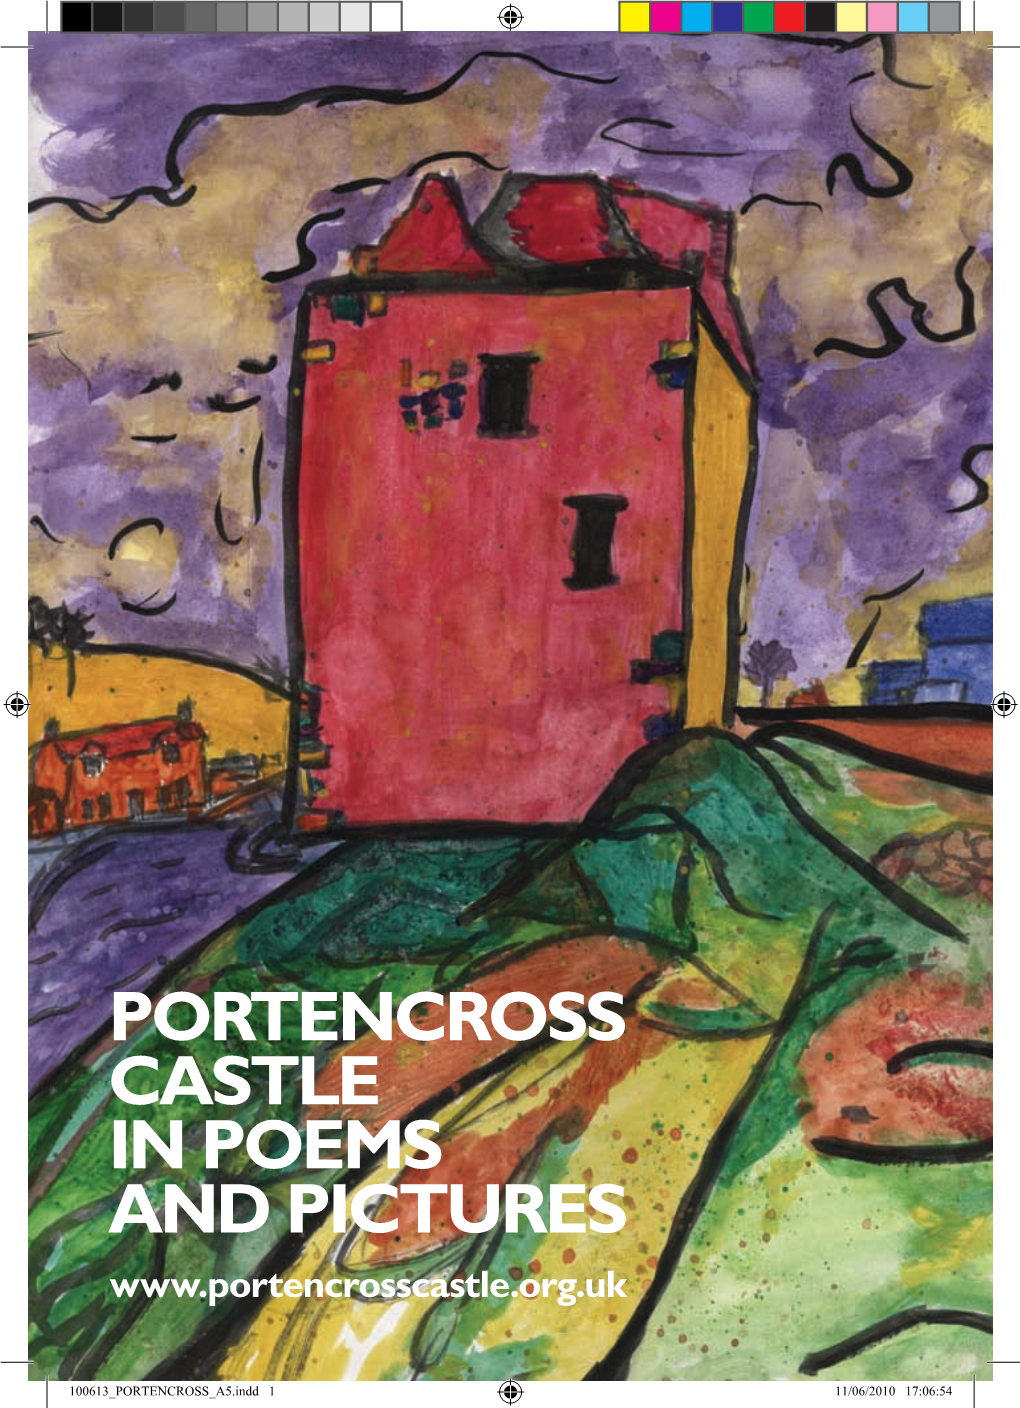 Portencross Castle in Poems and Pictures